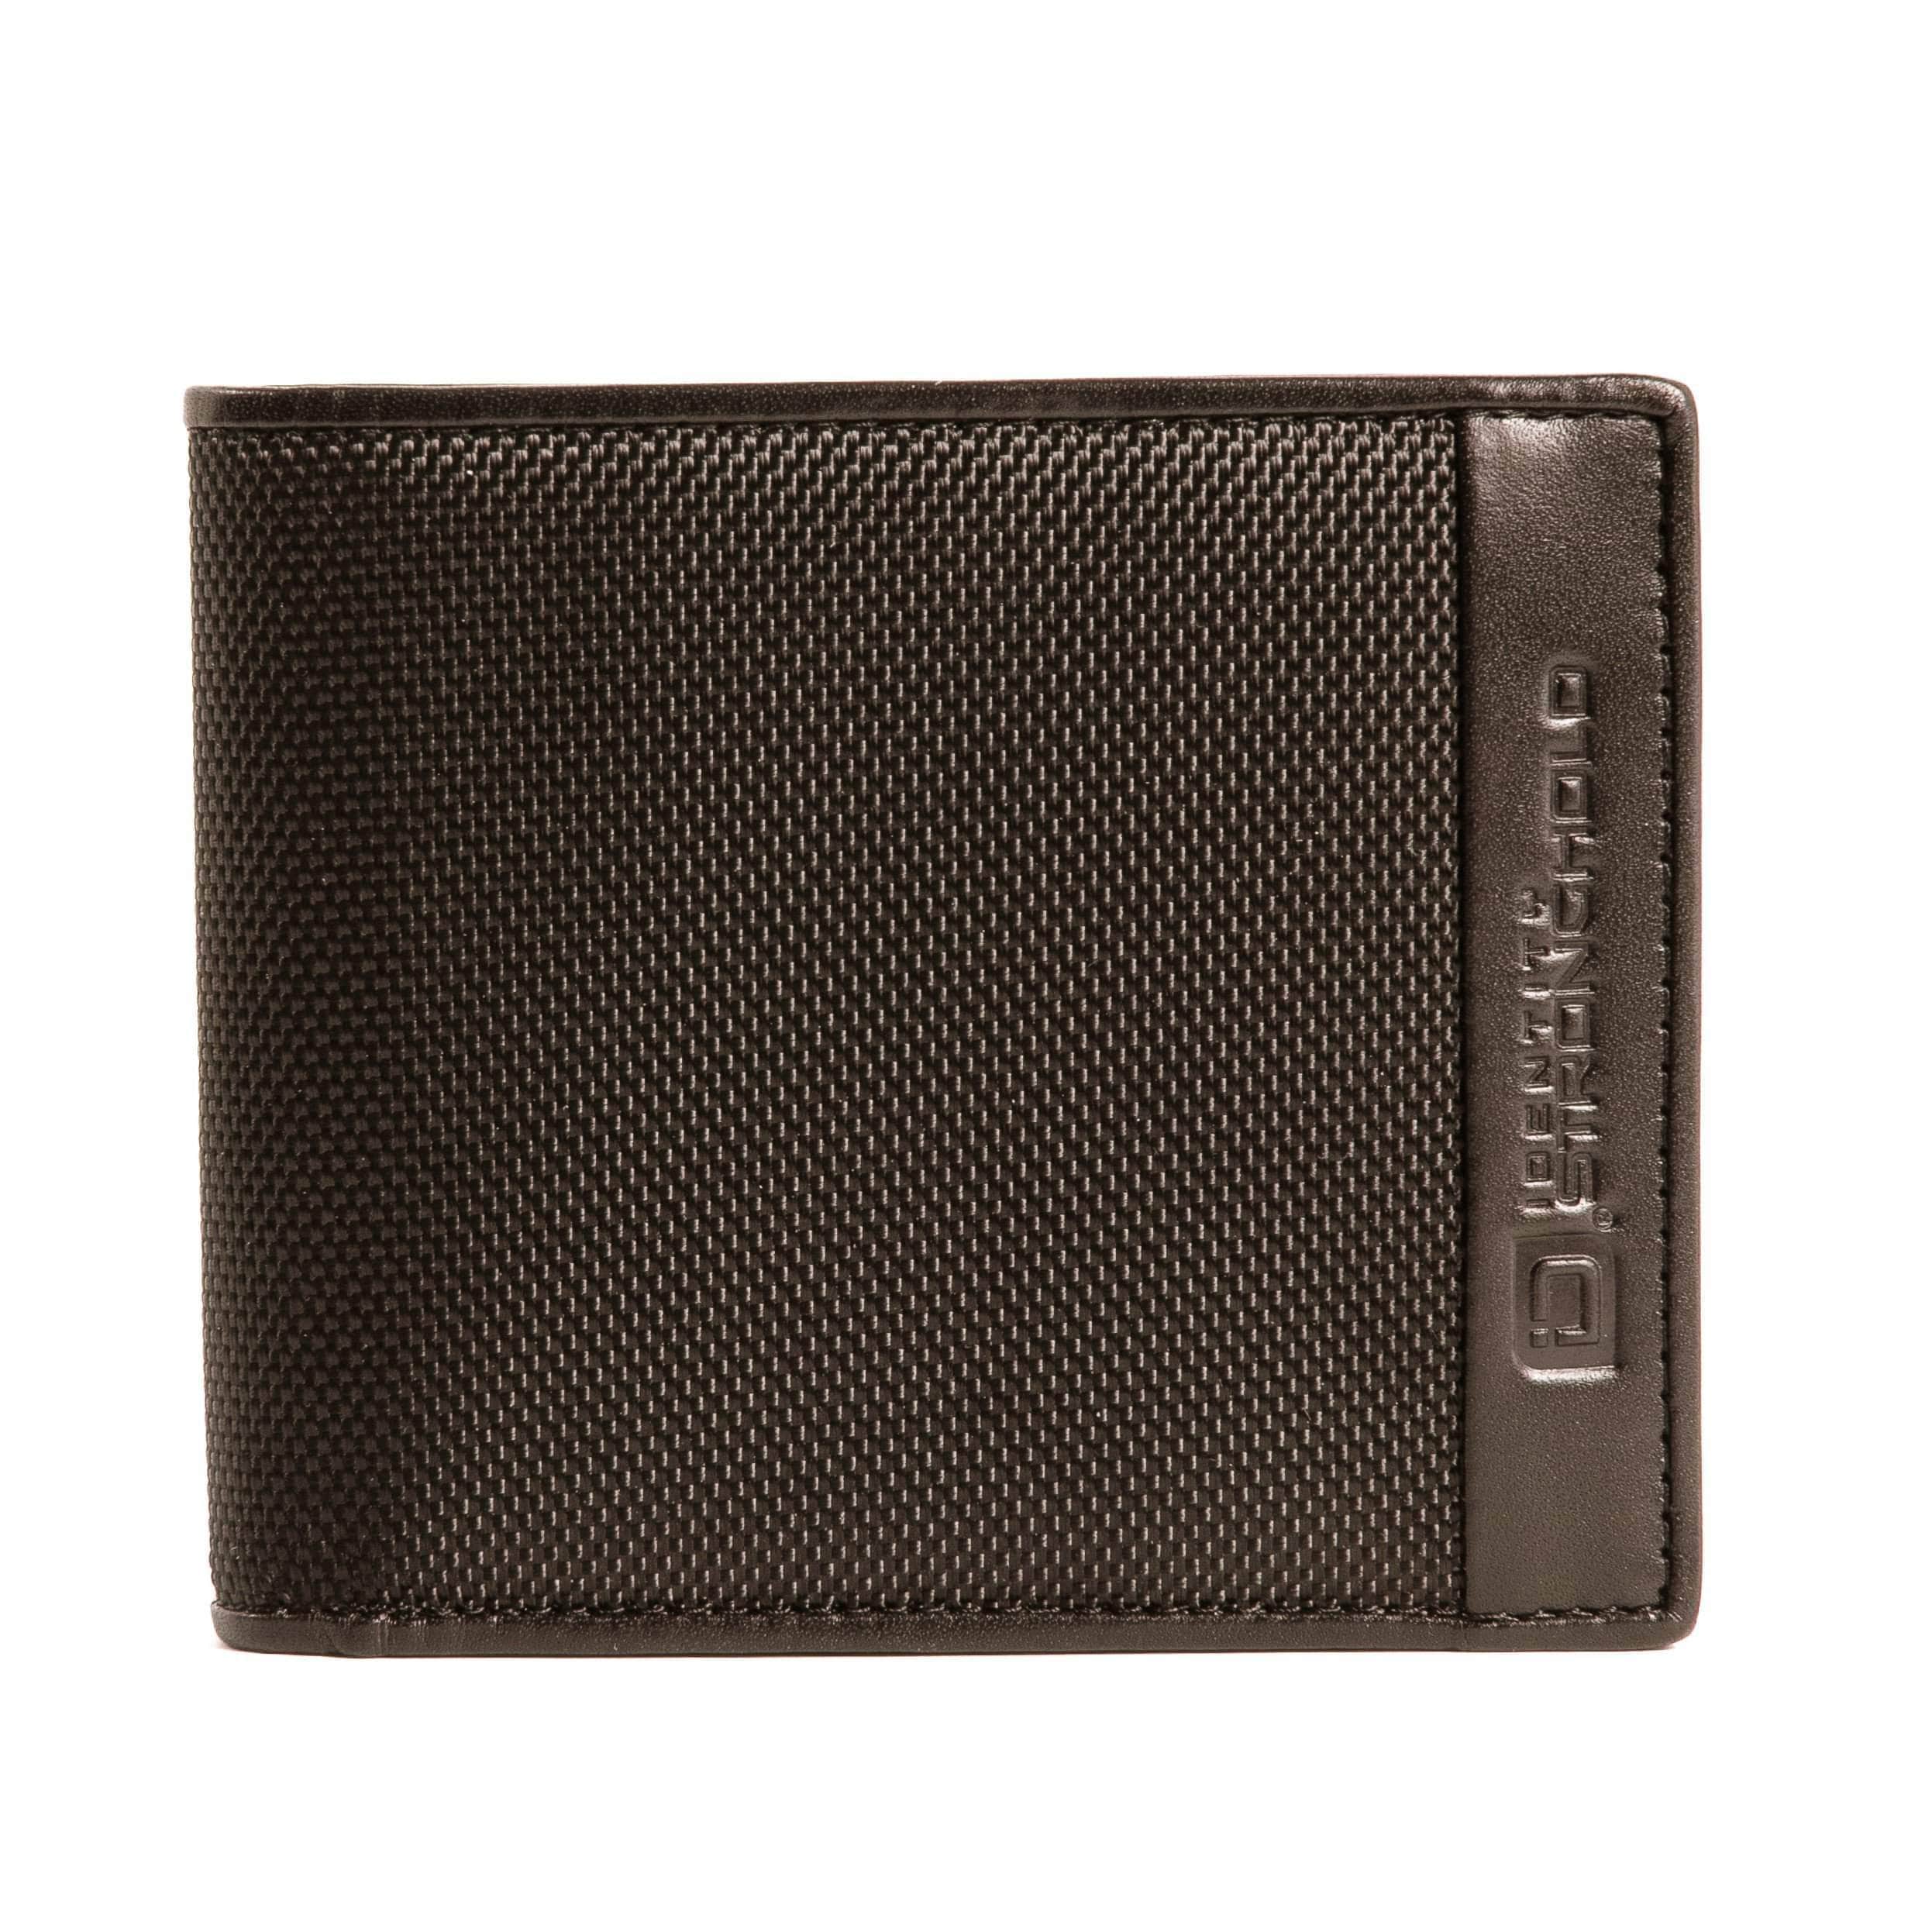 ID Stronghold Men's Wallet dark brown Mens RFID Wallet - Slim 7 Slot Bifold With ID in Leather and Nylon